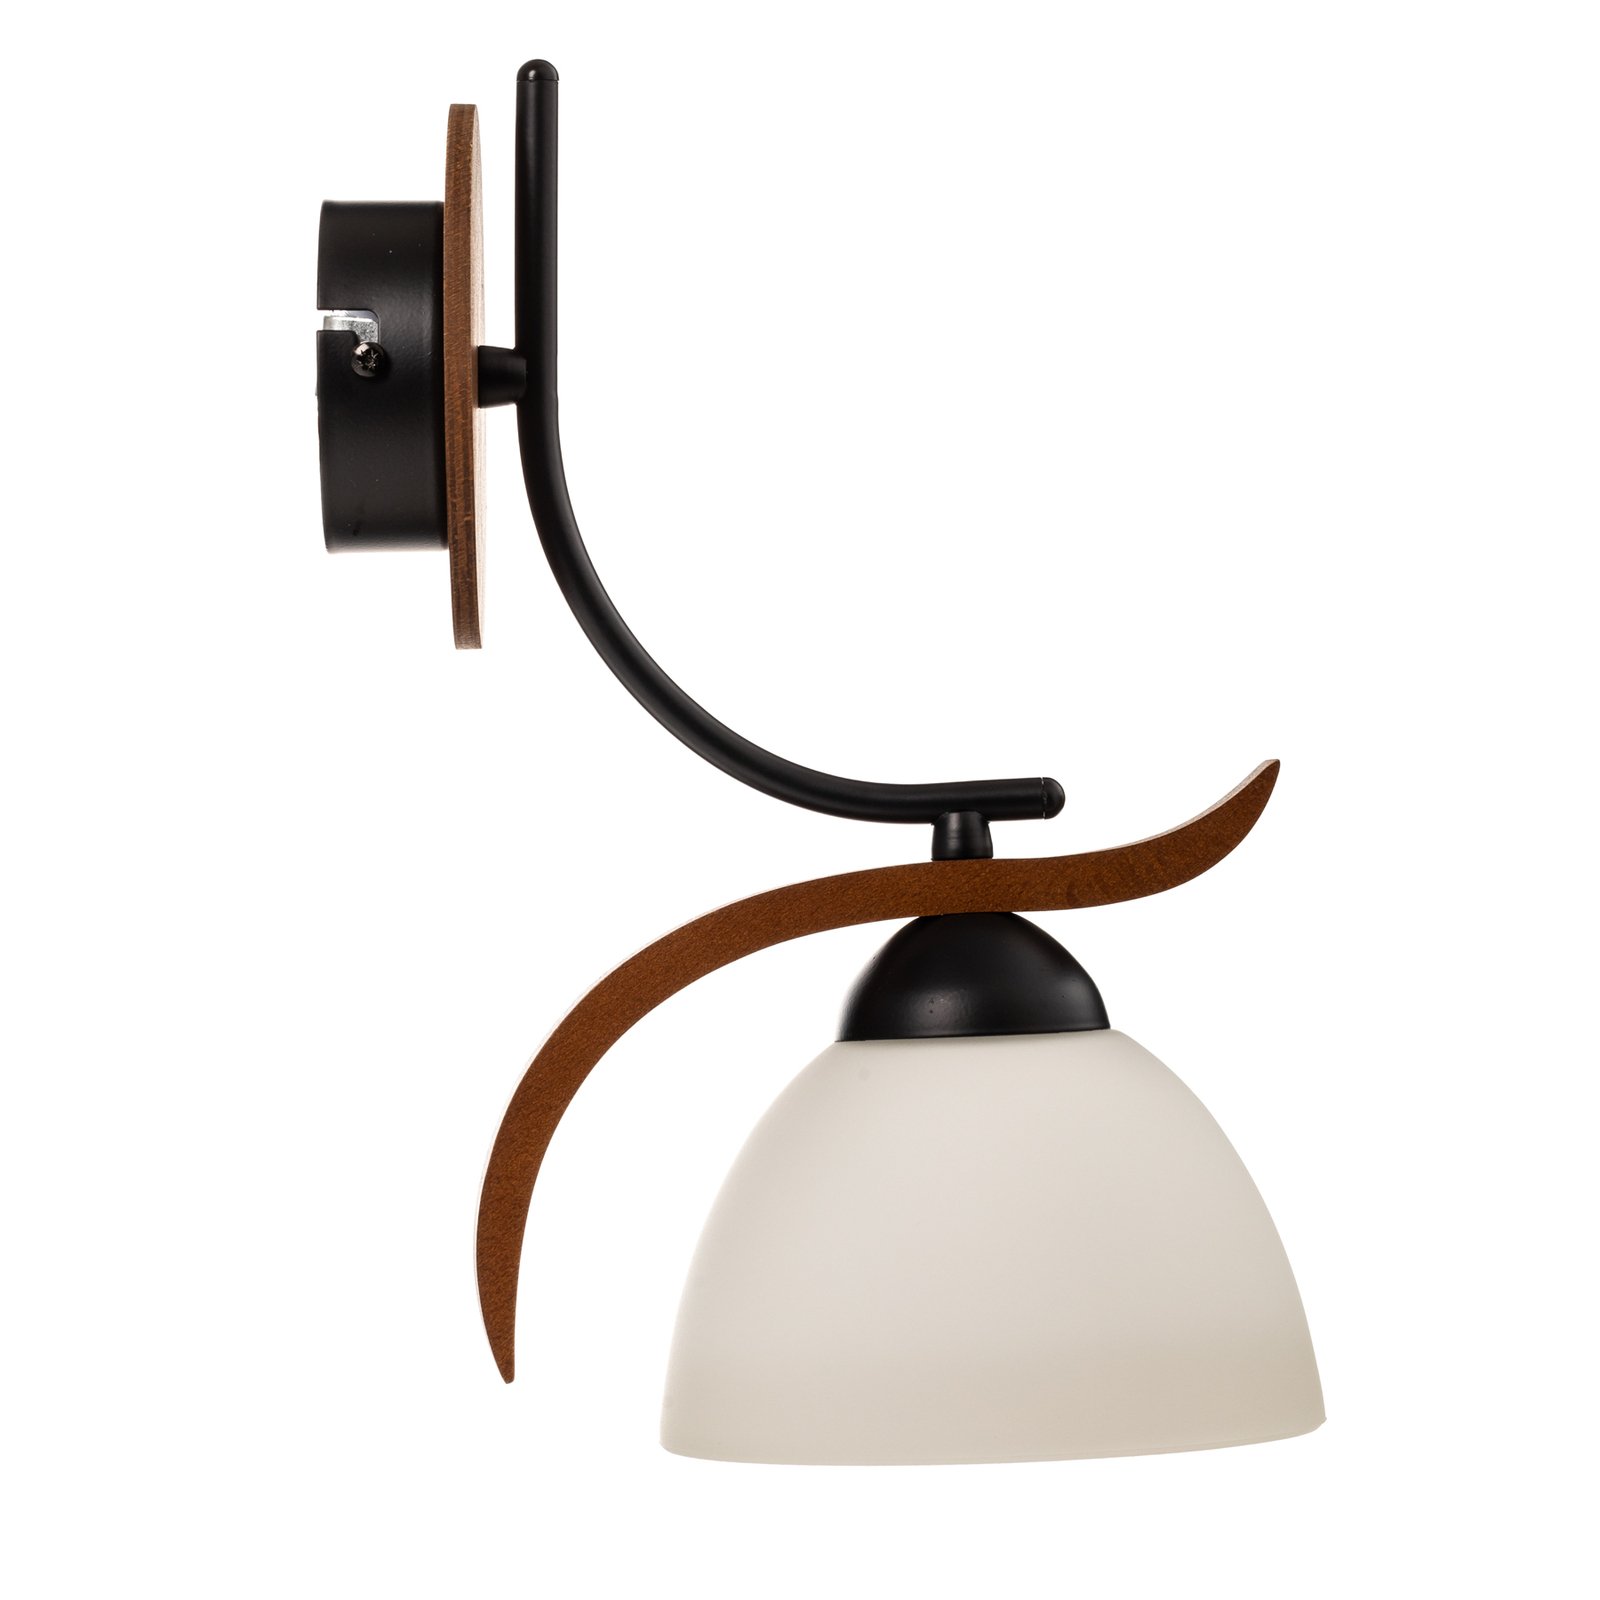 Brakel wall light with wooden details